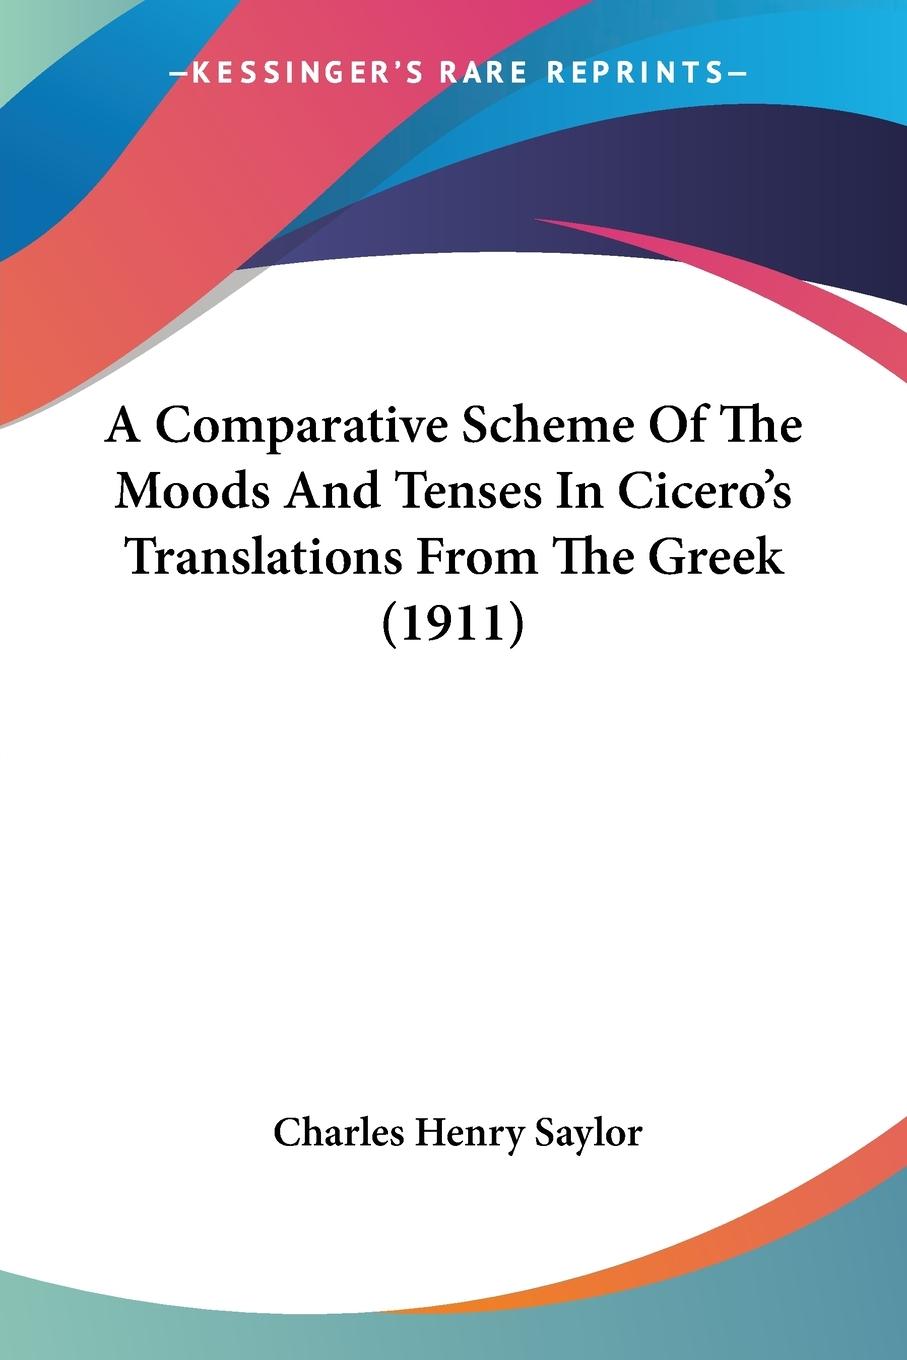 A Comparative Scheme Of The Moods And Tenses In Cicero s Translations From The Greek (1911) - Saylor, Charles Henry